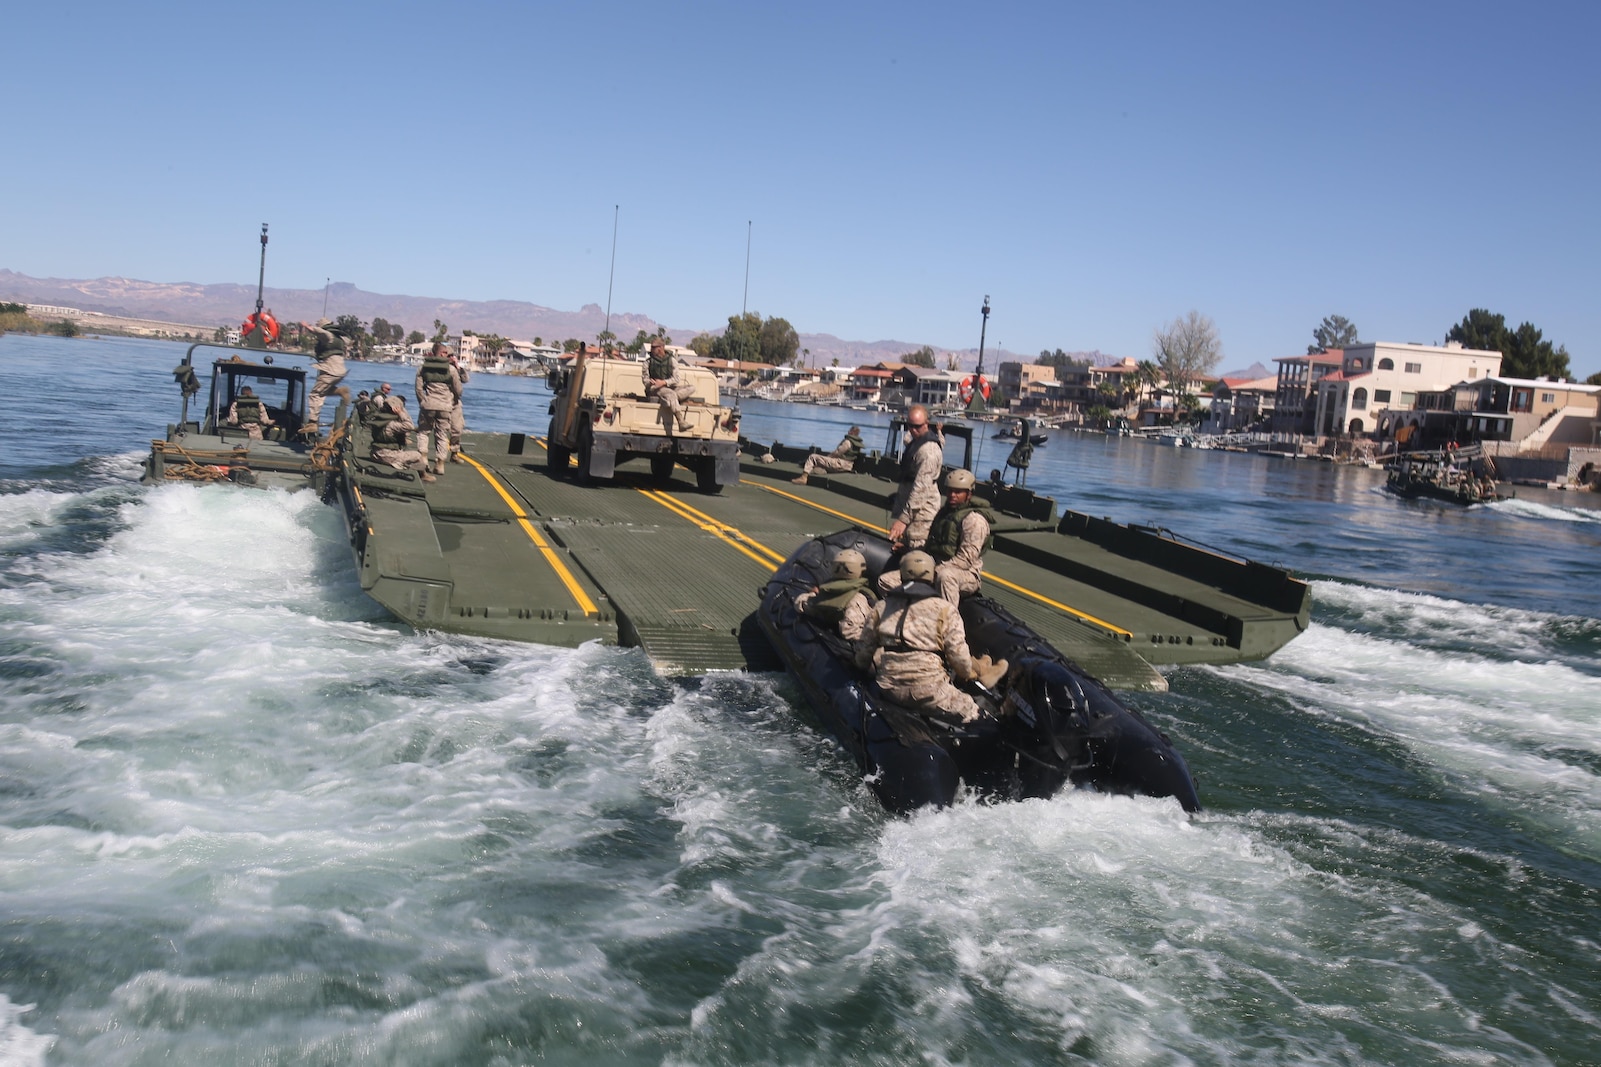 Marines with Bridge Company, 7th Engineer Support Battalion, 1st Marine Logistics Group, drive a Combat Rubber Raiding Craft onto the back of an Improved Ribbon Bridge during a training exercise on the Colorado River in Laughlin, Nev., March 17-21, 2014.  More than 60 Marines trained in moving heavy equipment, to include 7-tons and Humvees, across a flowing body of water using BEBs and an Improved Ribbon Bridge. The IRB is a multi-piece floating bridge that can function as a raft. The BEBs were used to push the raft against the current. Despite being accustomed to training in a bay with little to no current, these Marines managed to transport two 7-tons up the river at the same time.